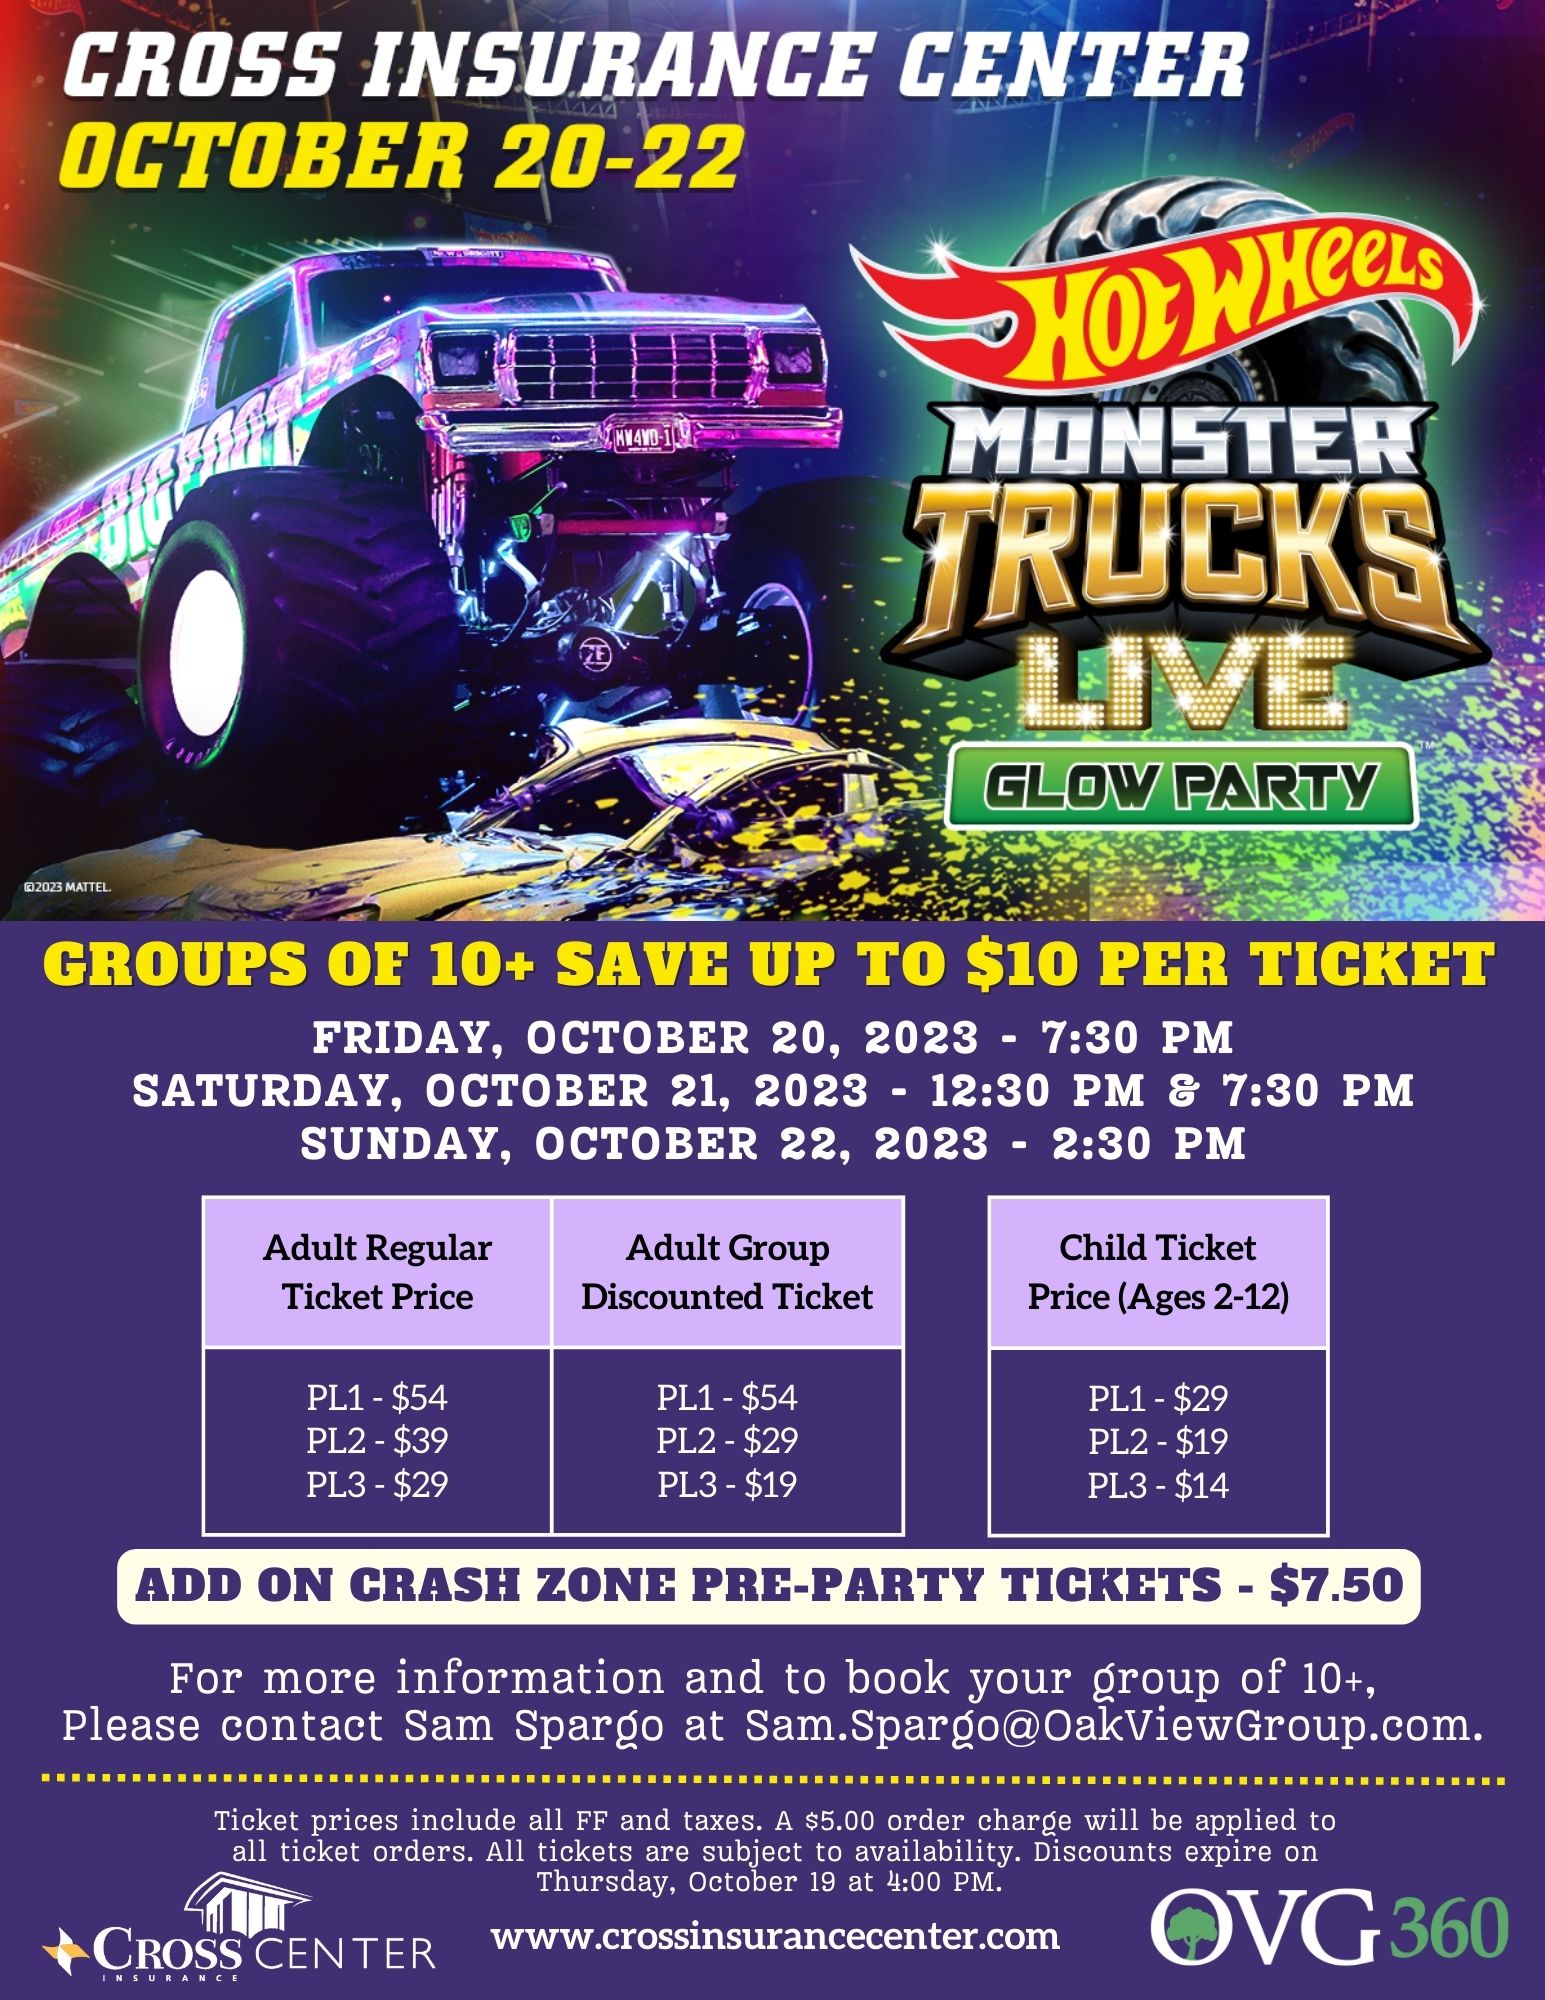 Hot Wheels Monster Trucks Live™ Glow Party